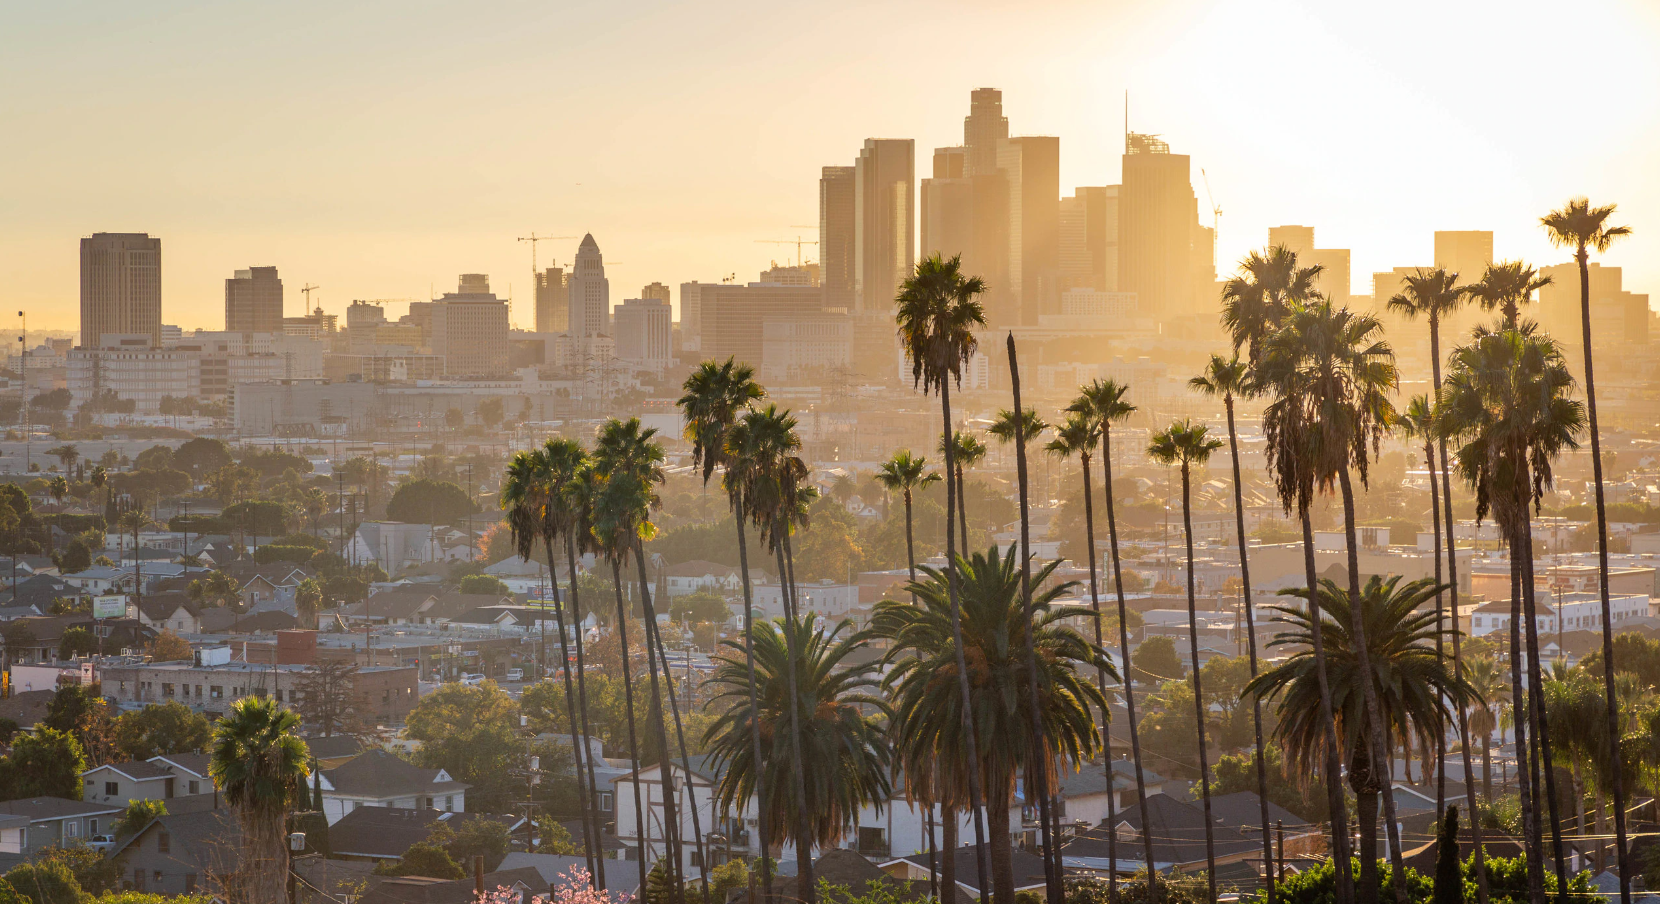 WOW! Direct flights from Edmonton to beautiful Los Angeles for only 126 CAD round-trip